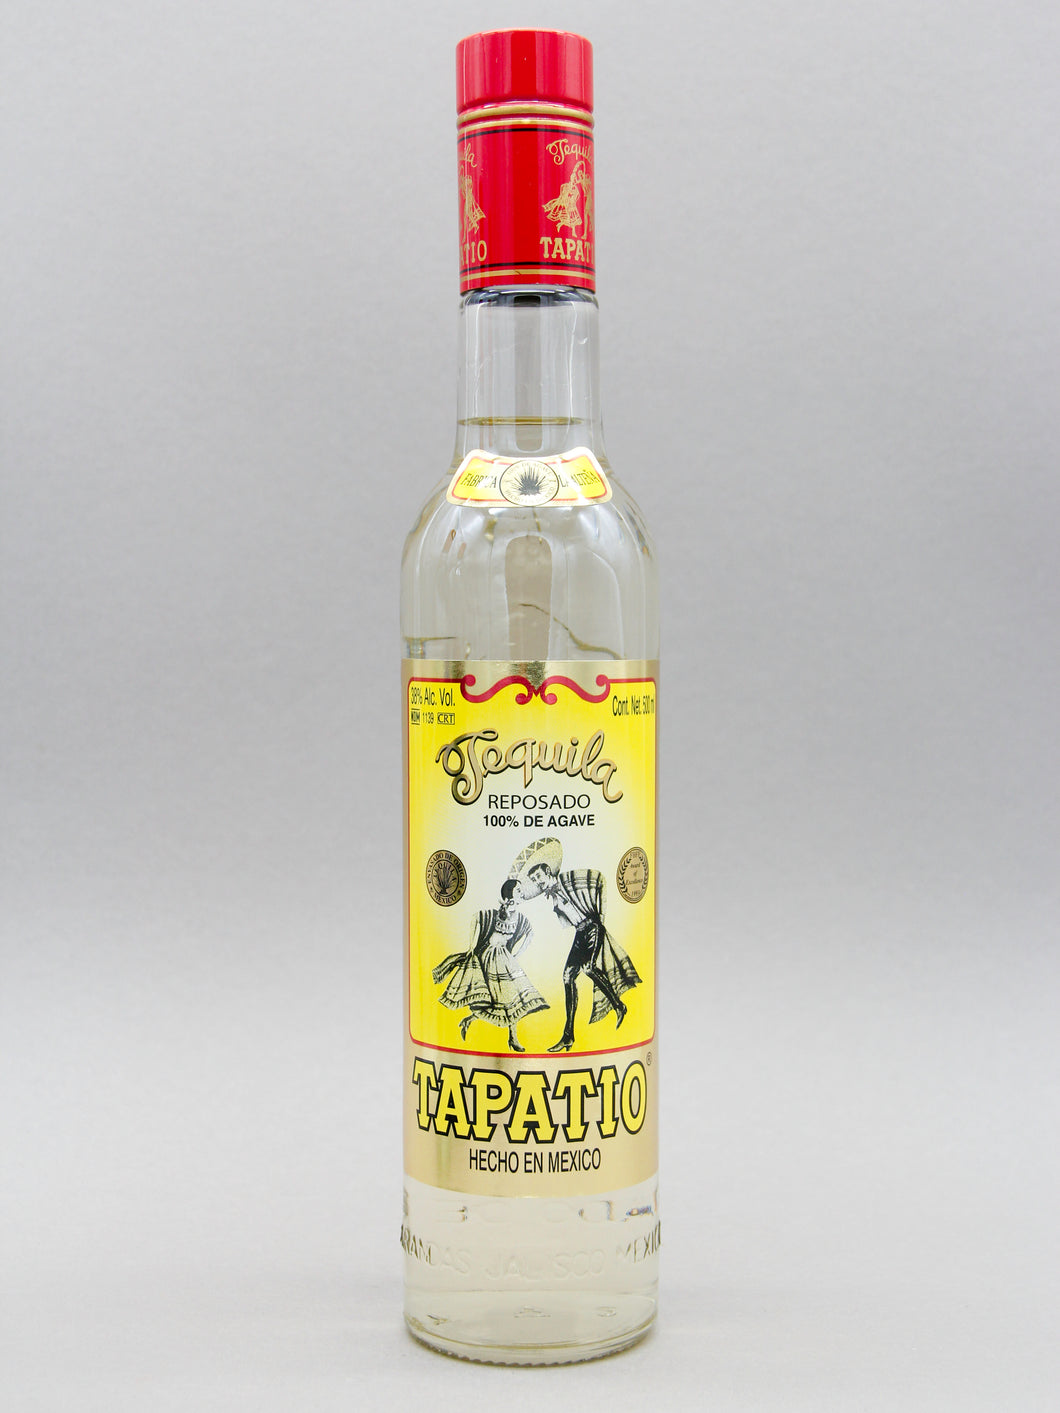 Tapatio Reposado Tequila, 100% Agave (38%, 50cl)